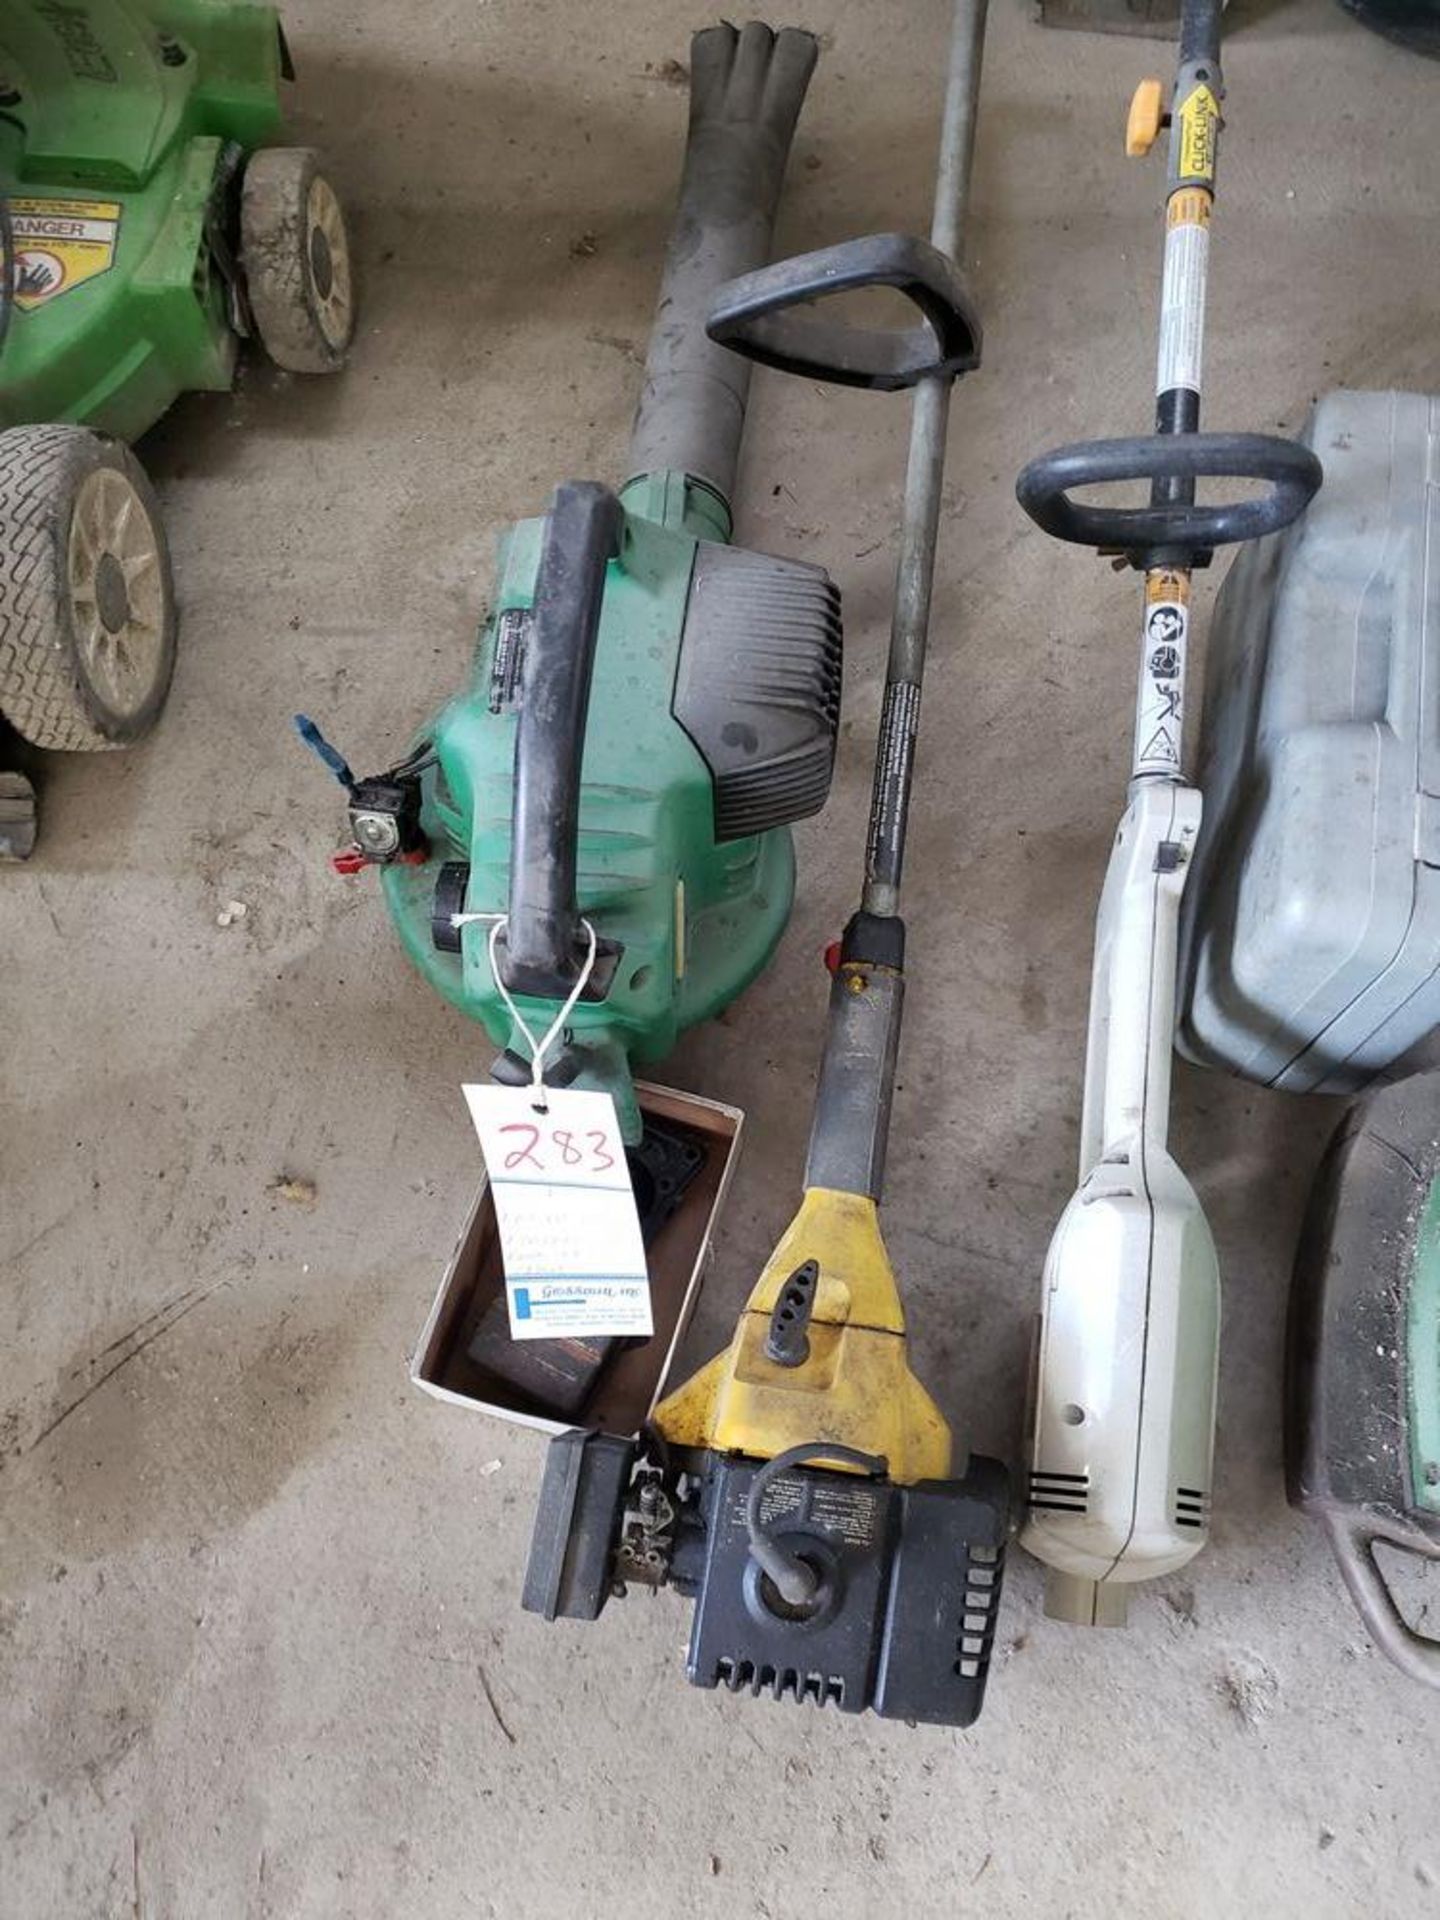 LOT OF LAWN EQUIPMENT BLOWERS, TRIMMERS - 7 ITEMS - Image 6 of 6